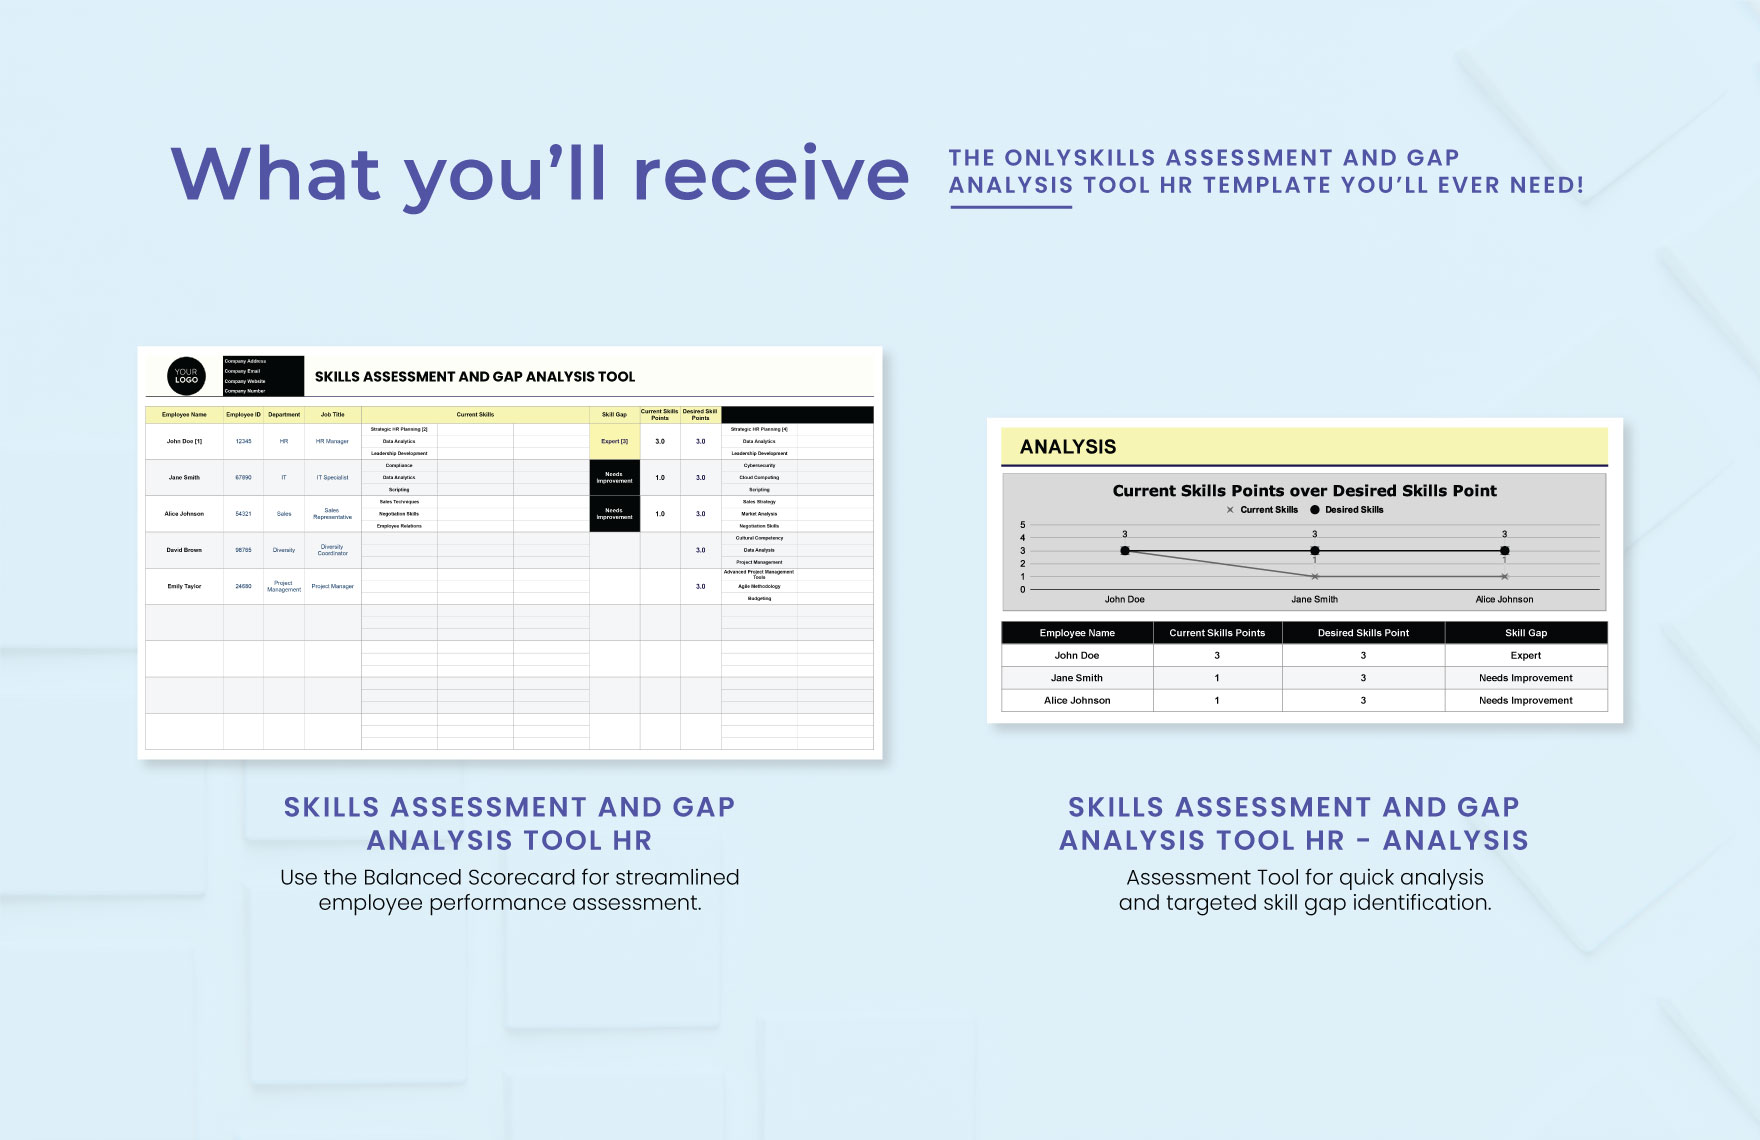 Skills Assessment and Gap Analysis Tool HR Template